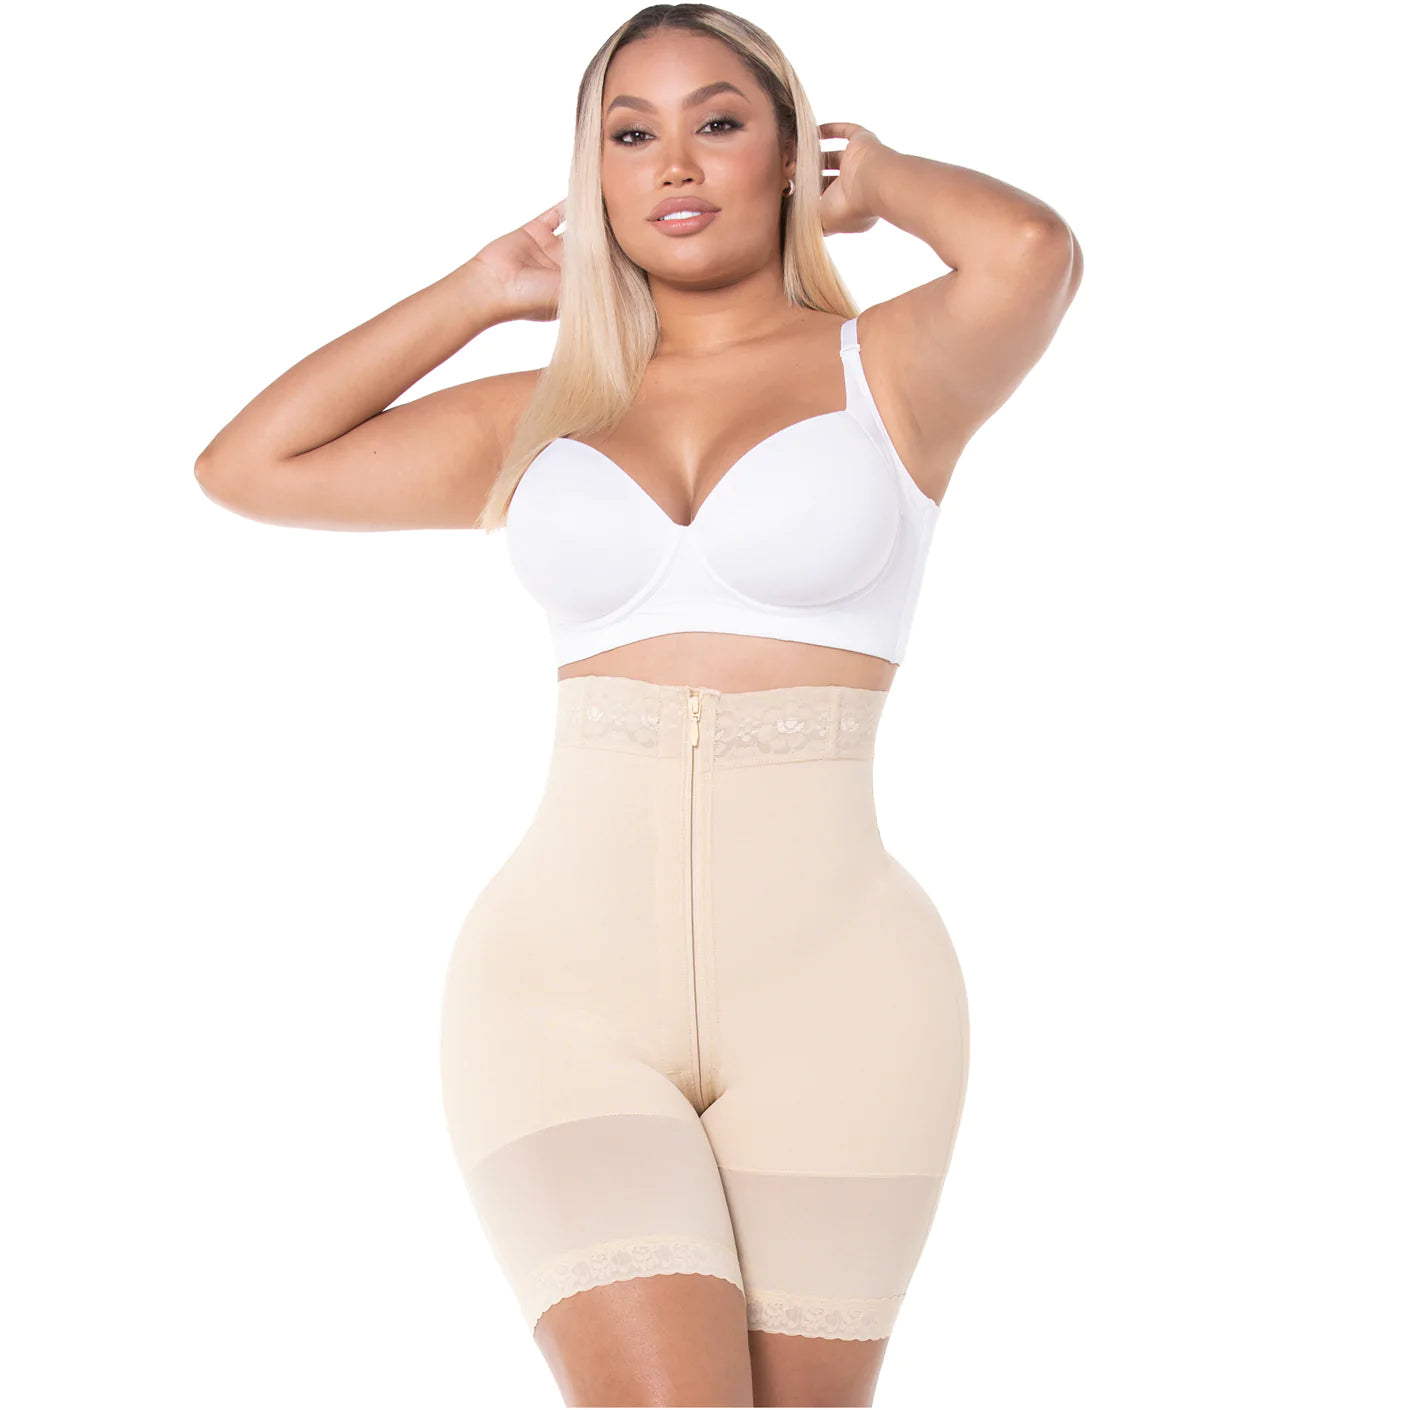 Buy Now - Body Care Post-Surgical Elastic Girdle Medium (28Cm): Comfort,  Support & Breathability